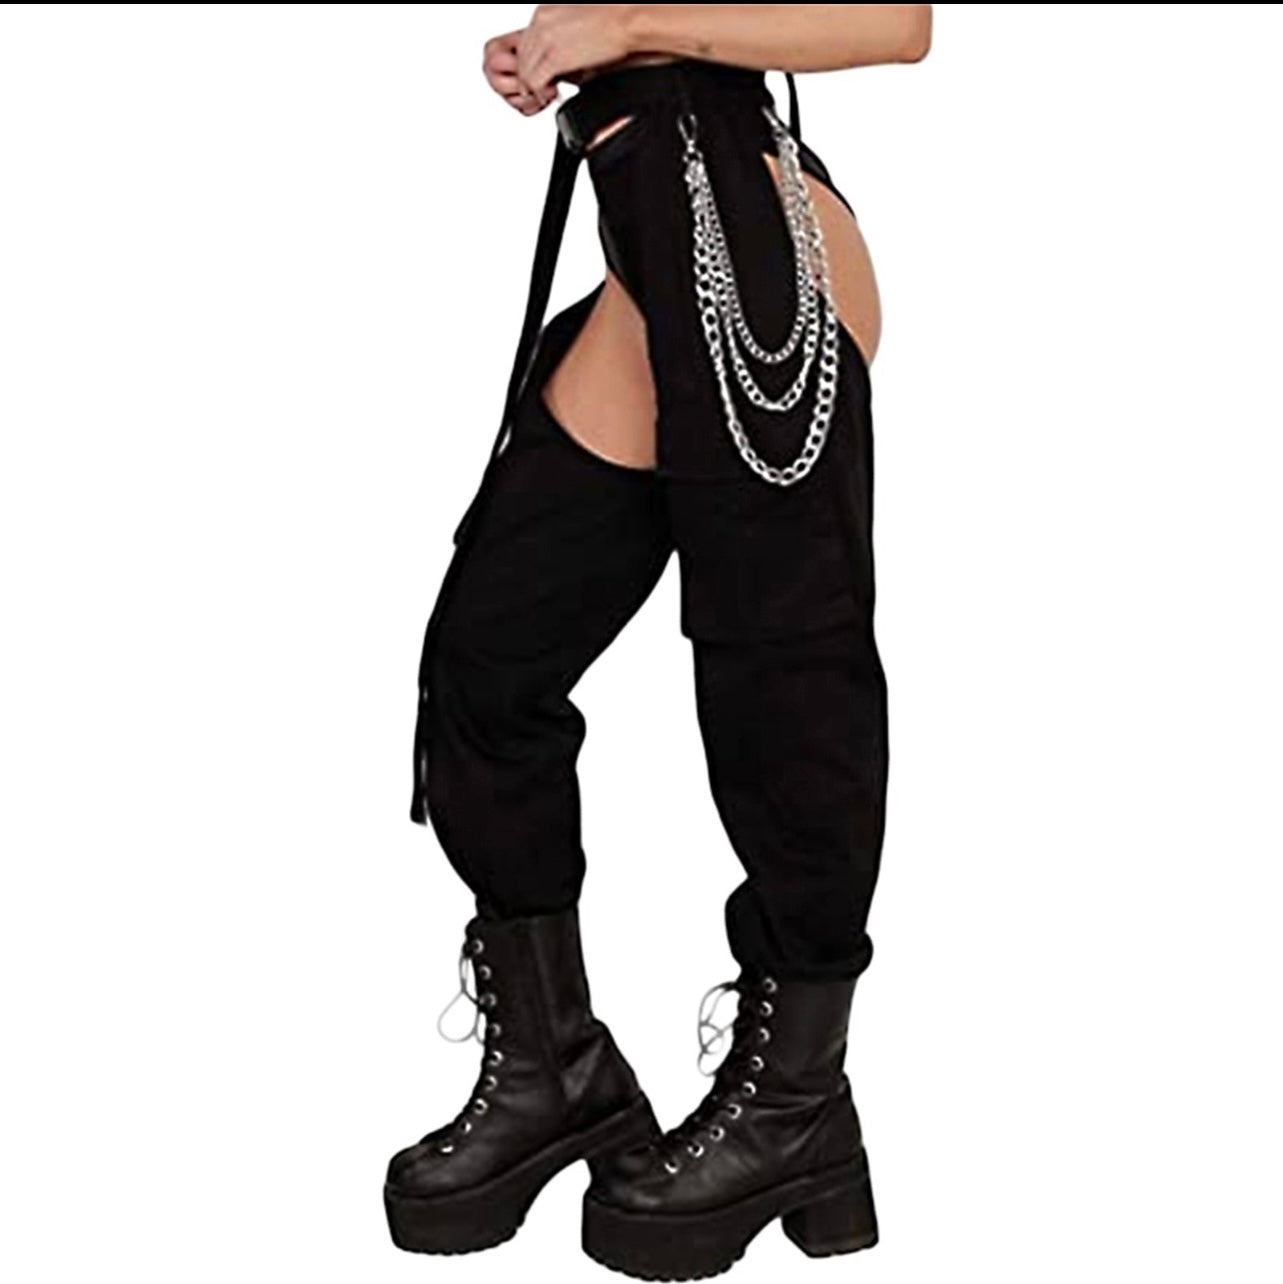 Claire’s Chained Chaps